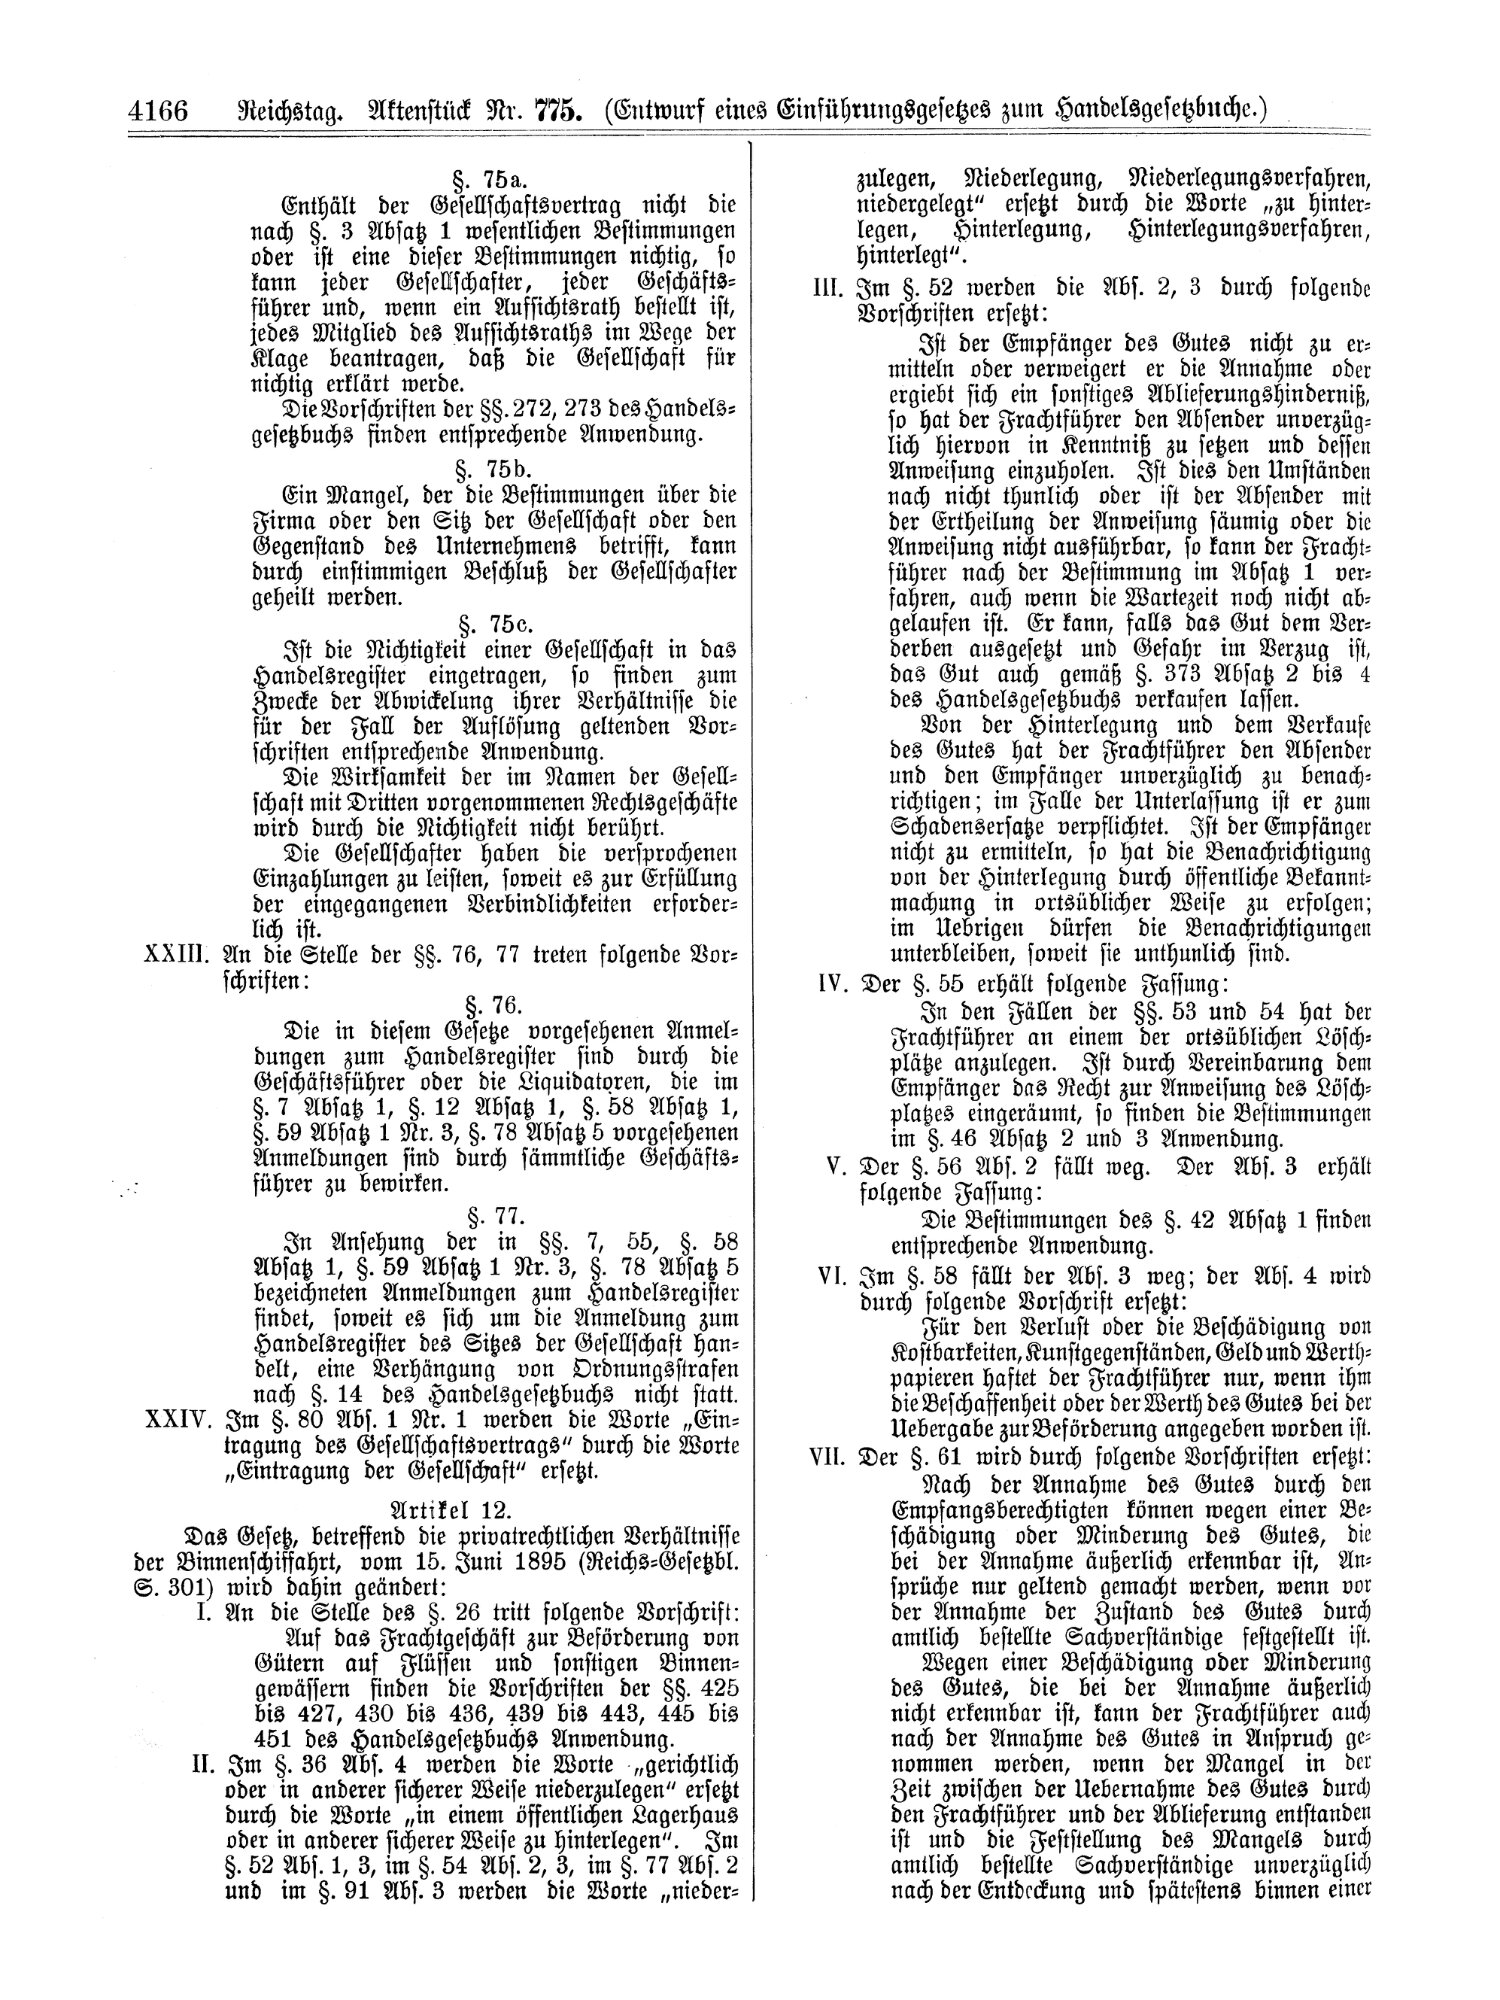 Scan of page 4166